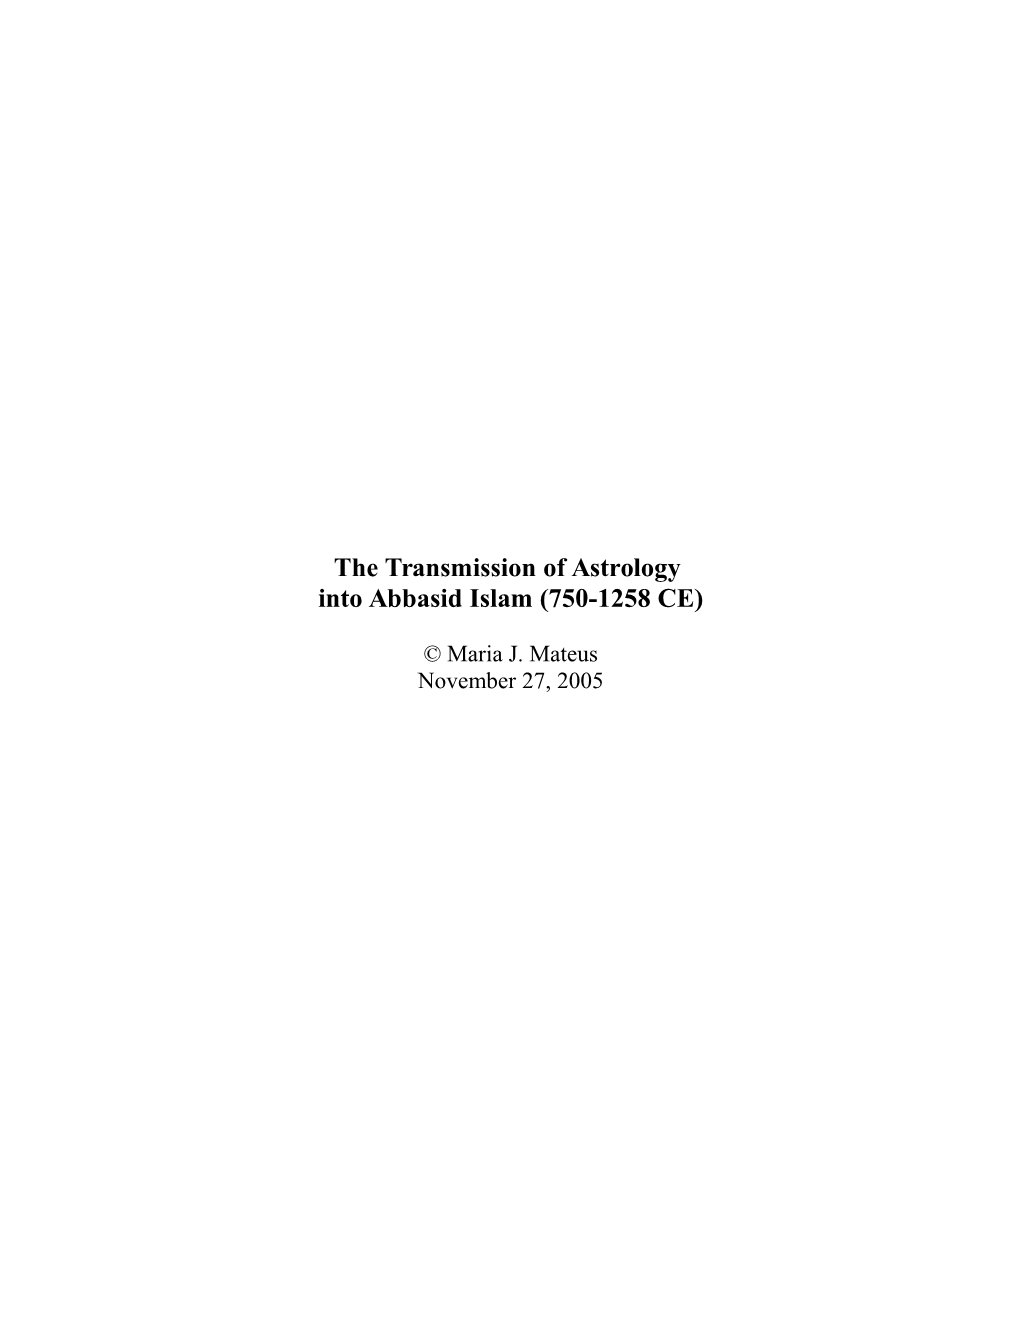 The Transmission of Astrology Into Abbasid Islam (750-1258 CE)